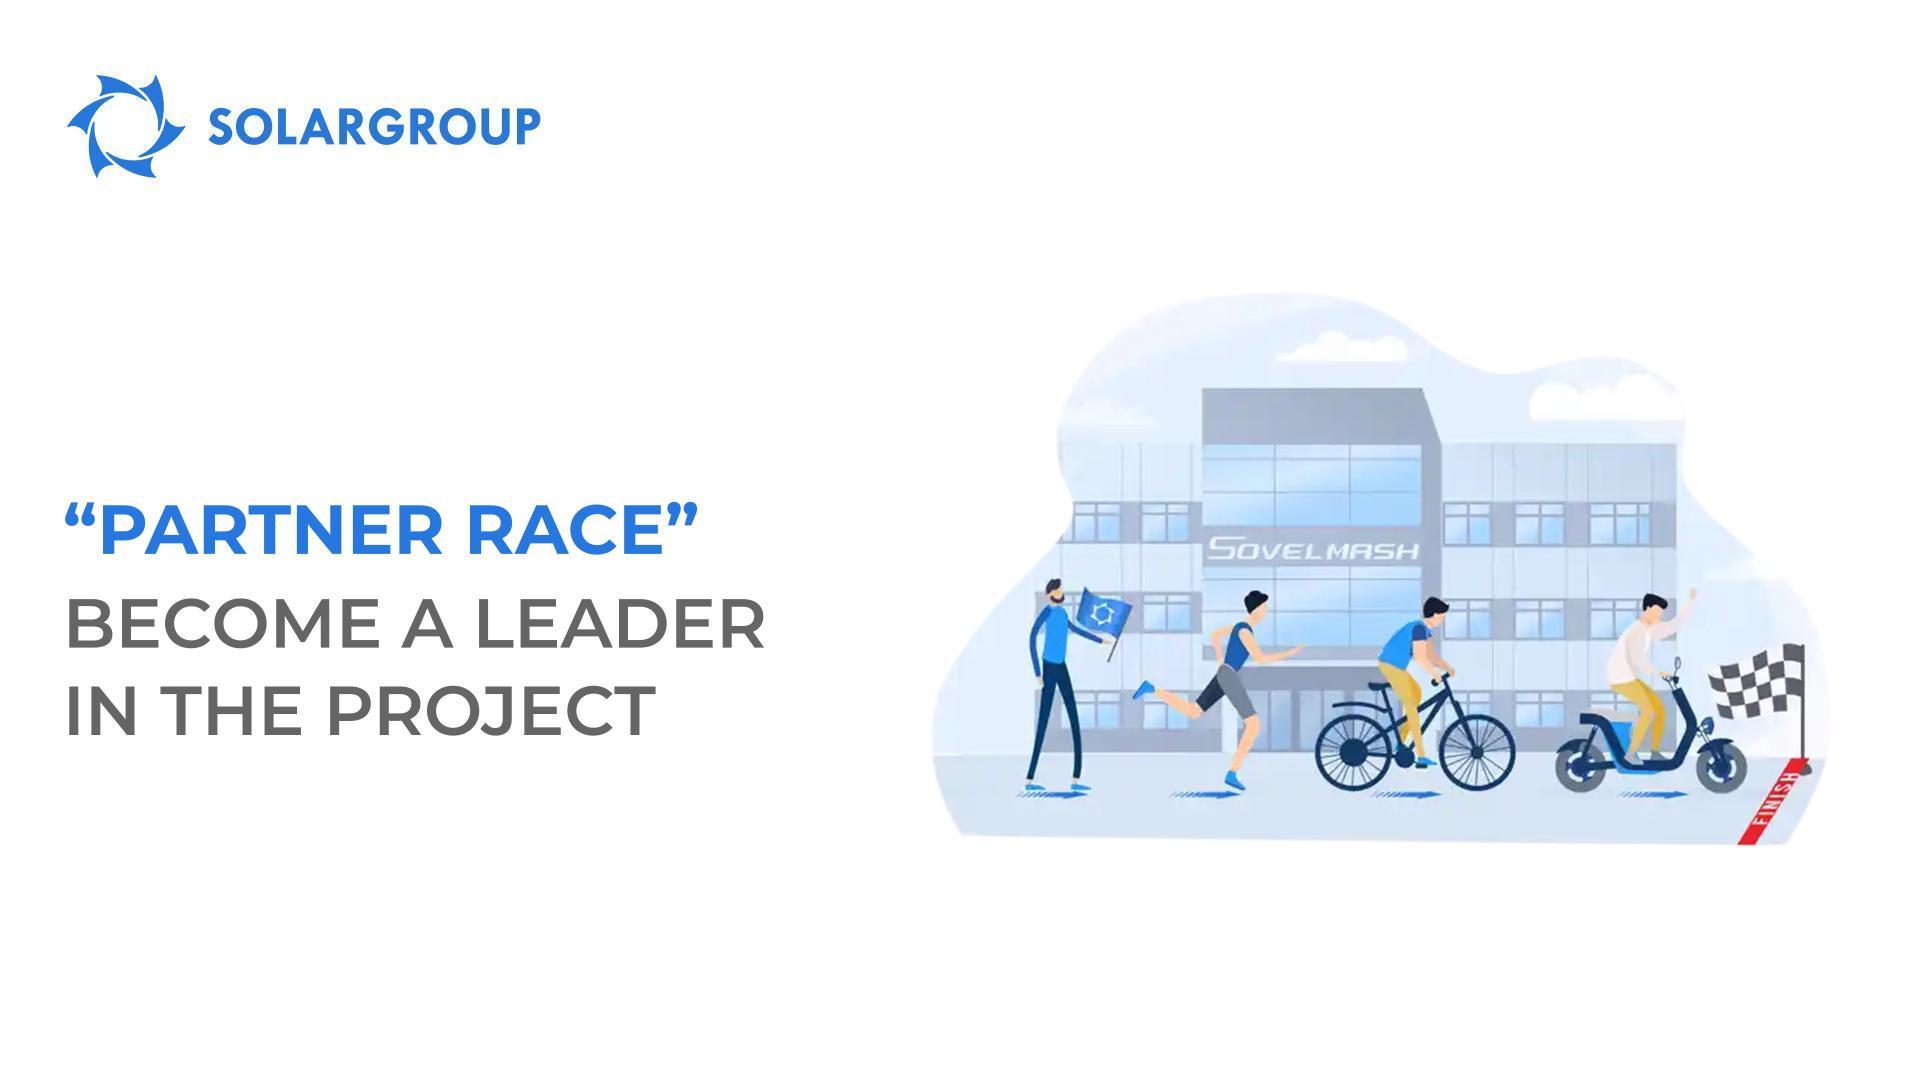 "Partner Race": become a leader in the project!